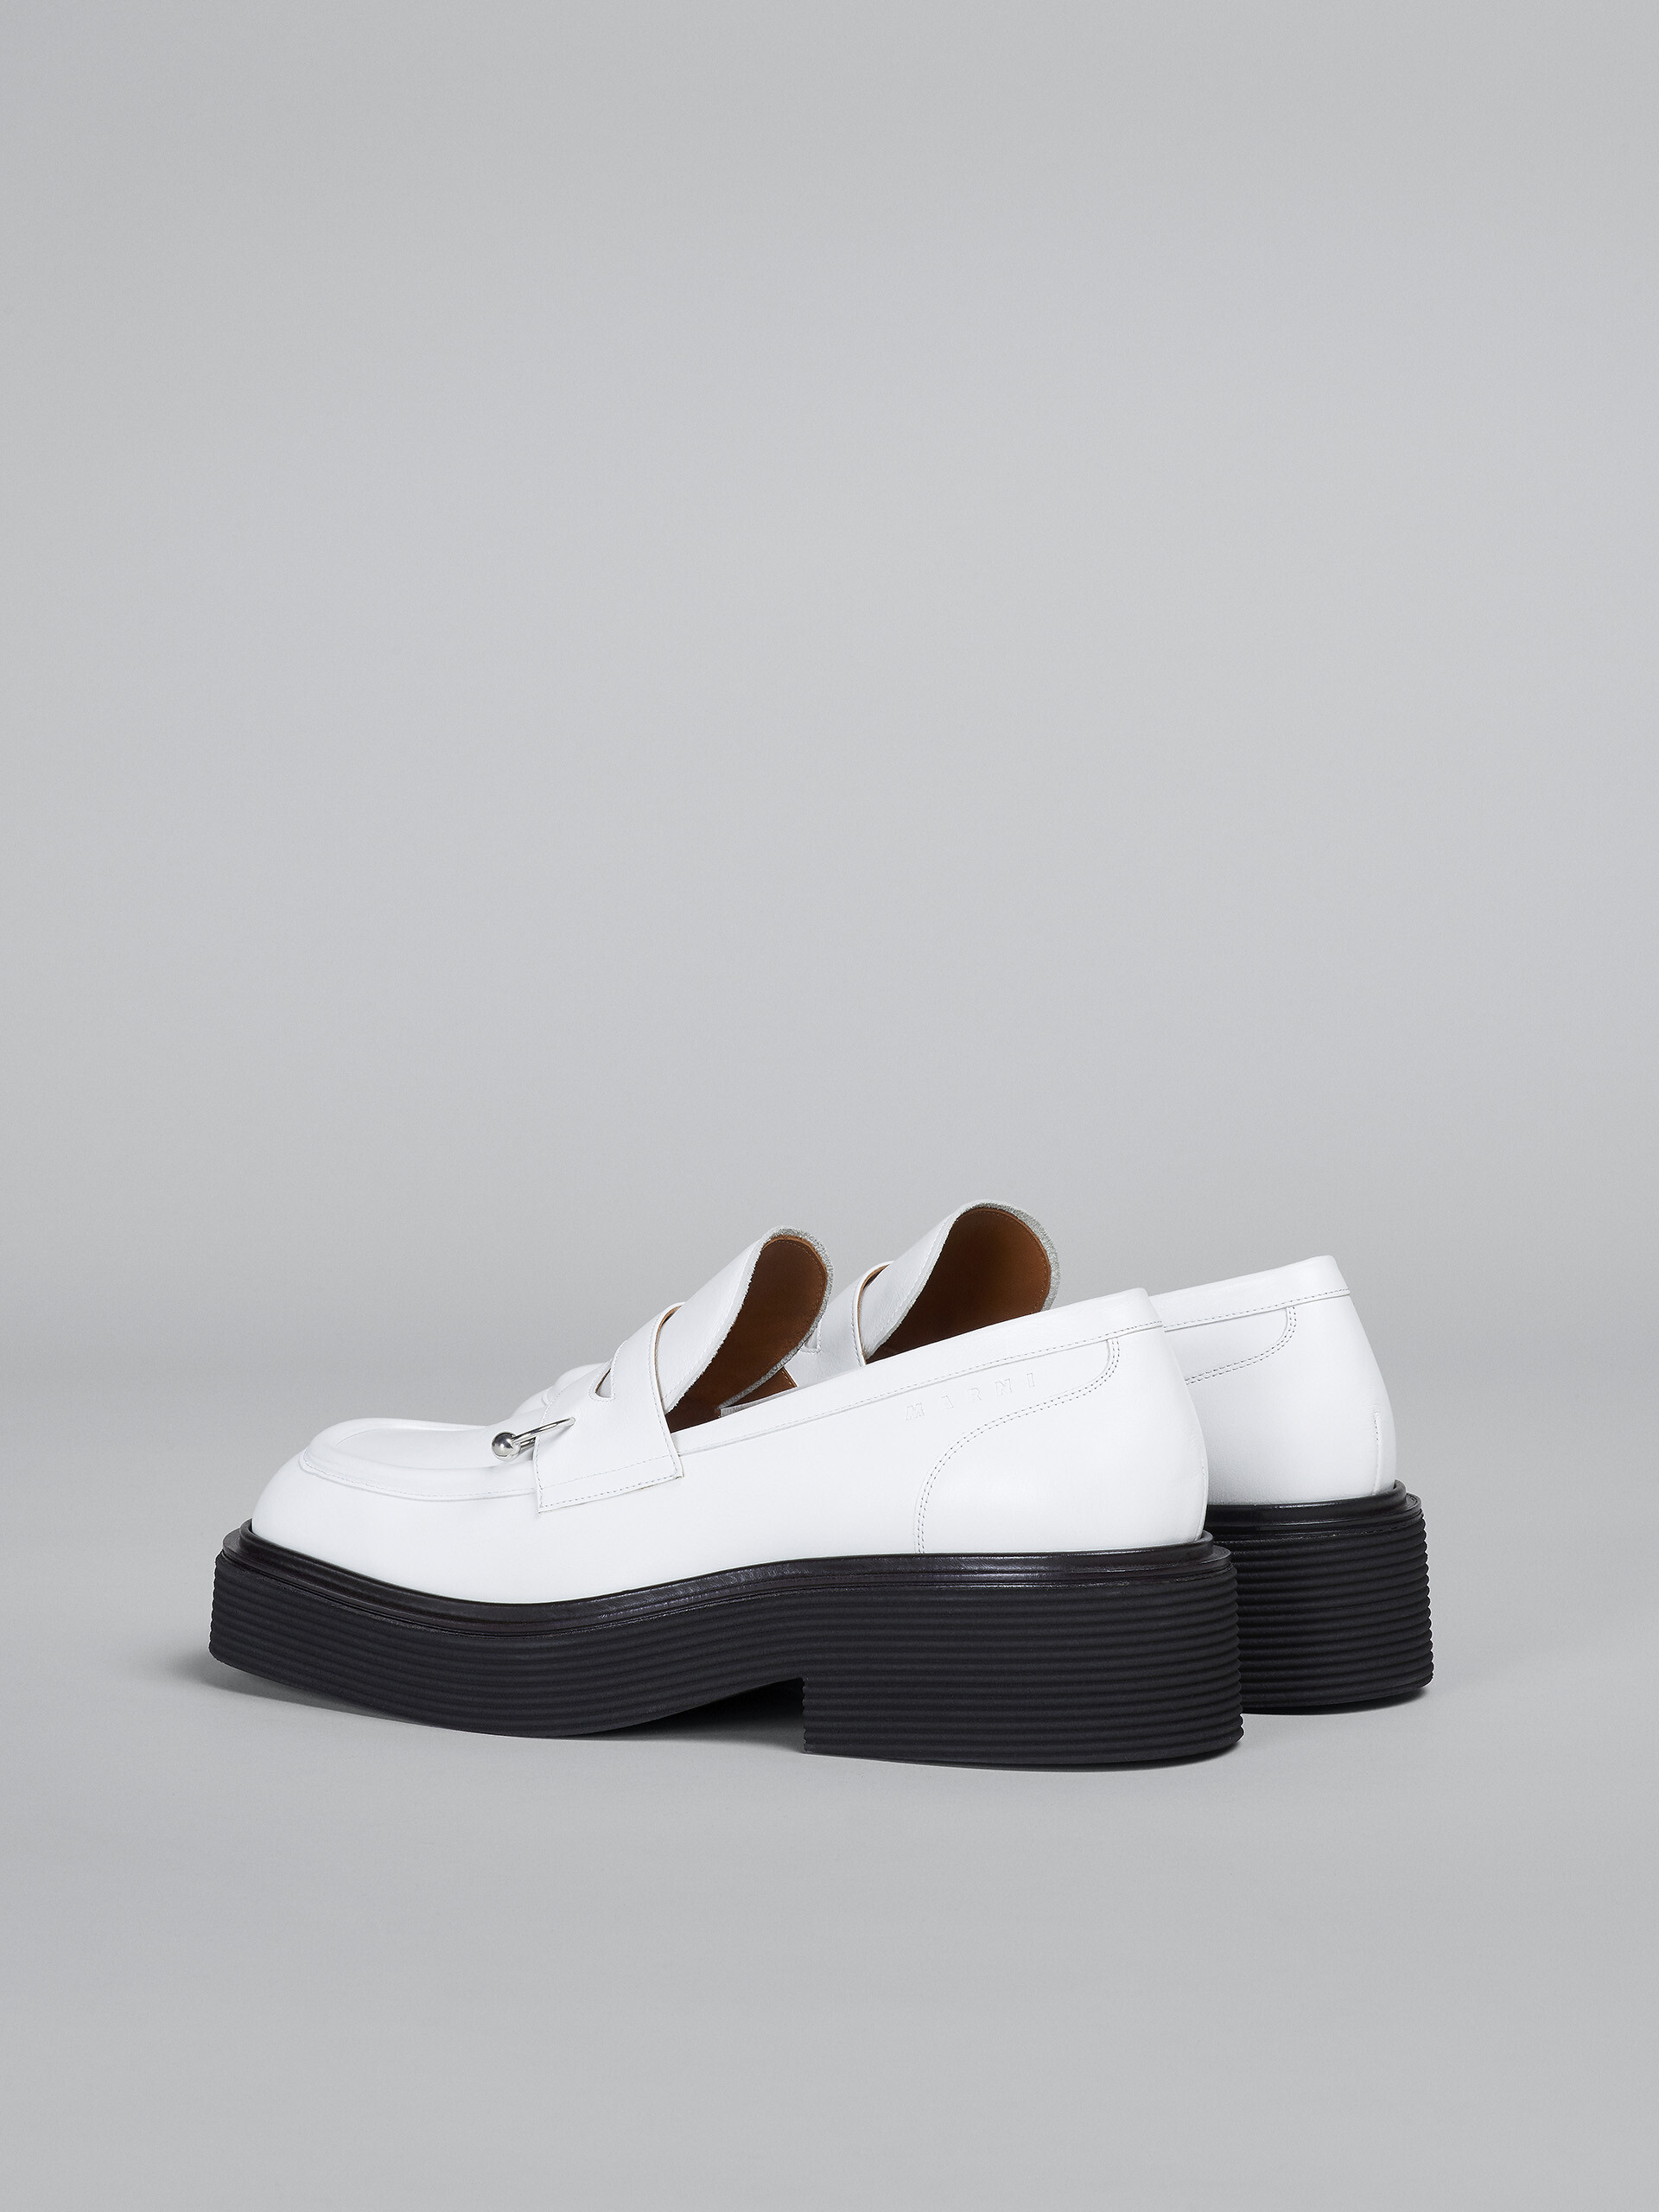 White leather moccasin - Mocassin - Image 3